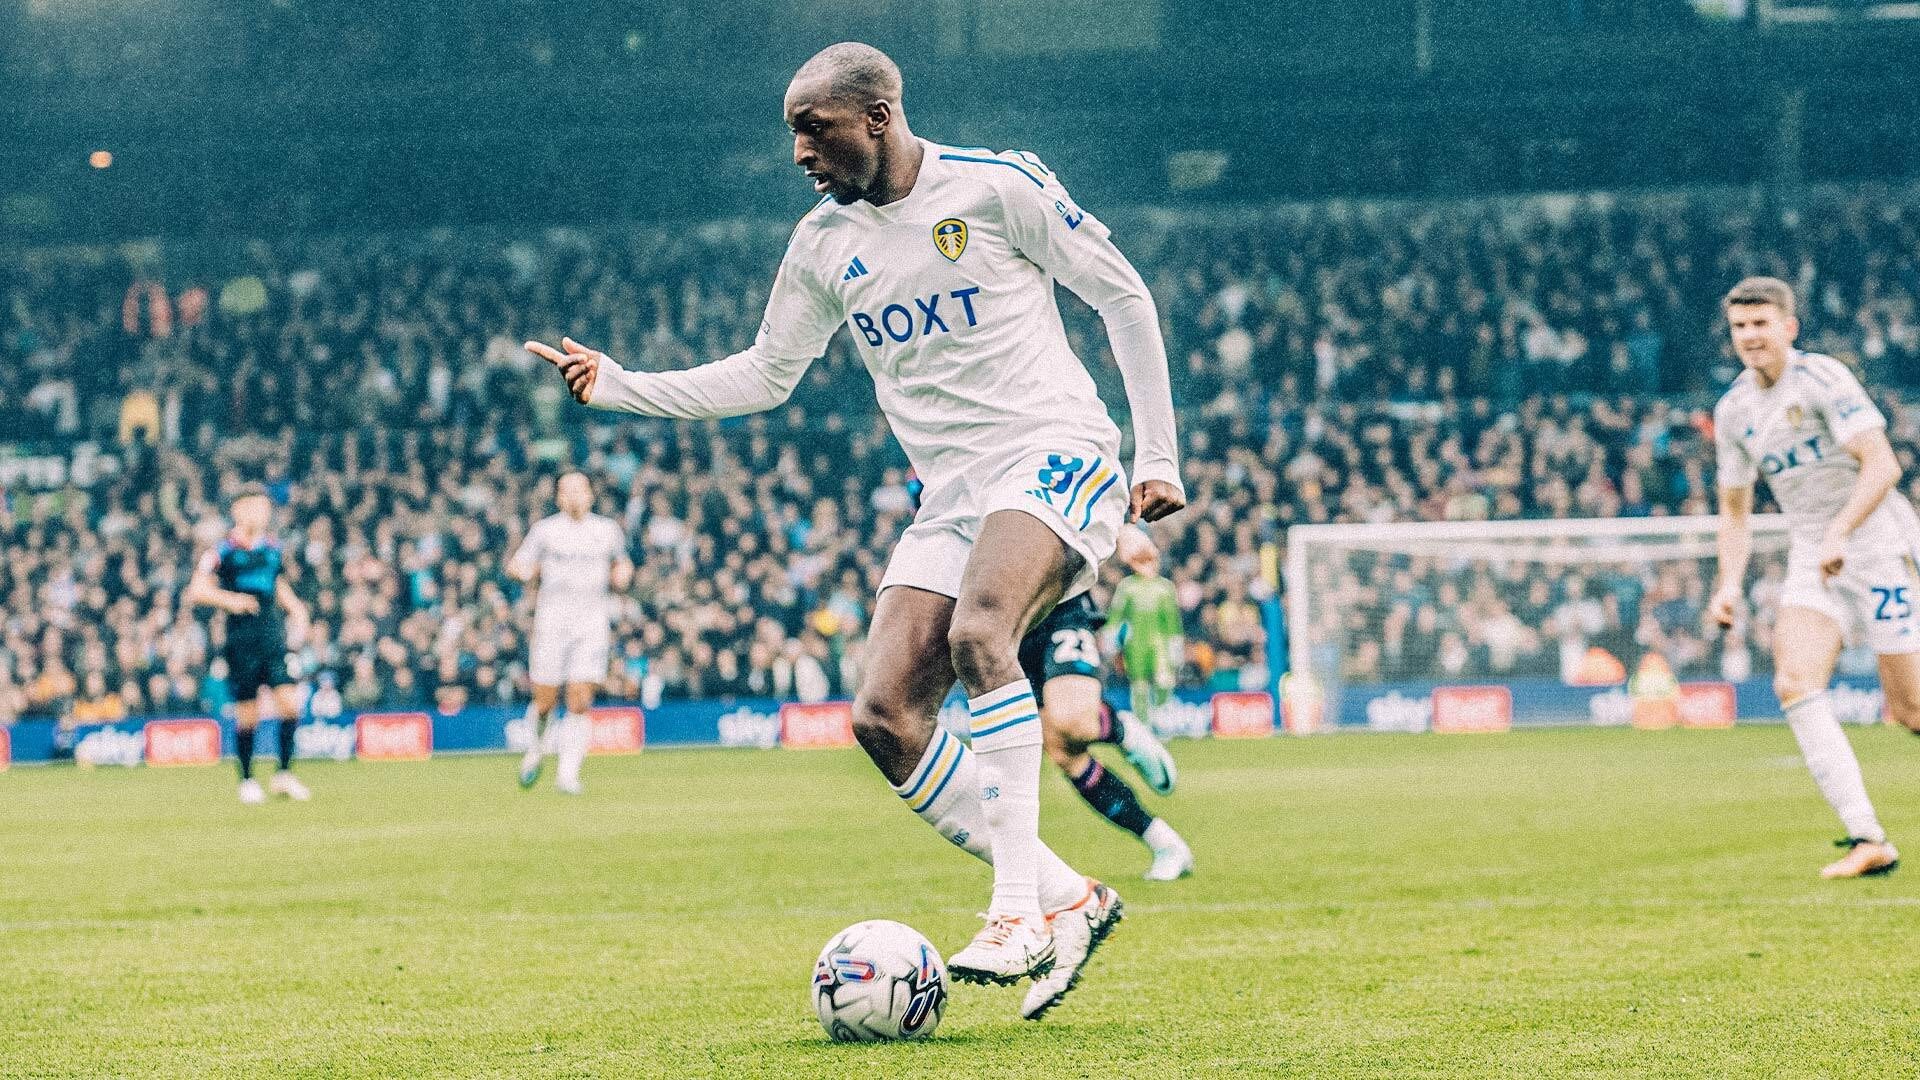 A photo of Glen Kamara playing for Leeds, serenely controlling a football at Elland Road because he's really good